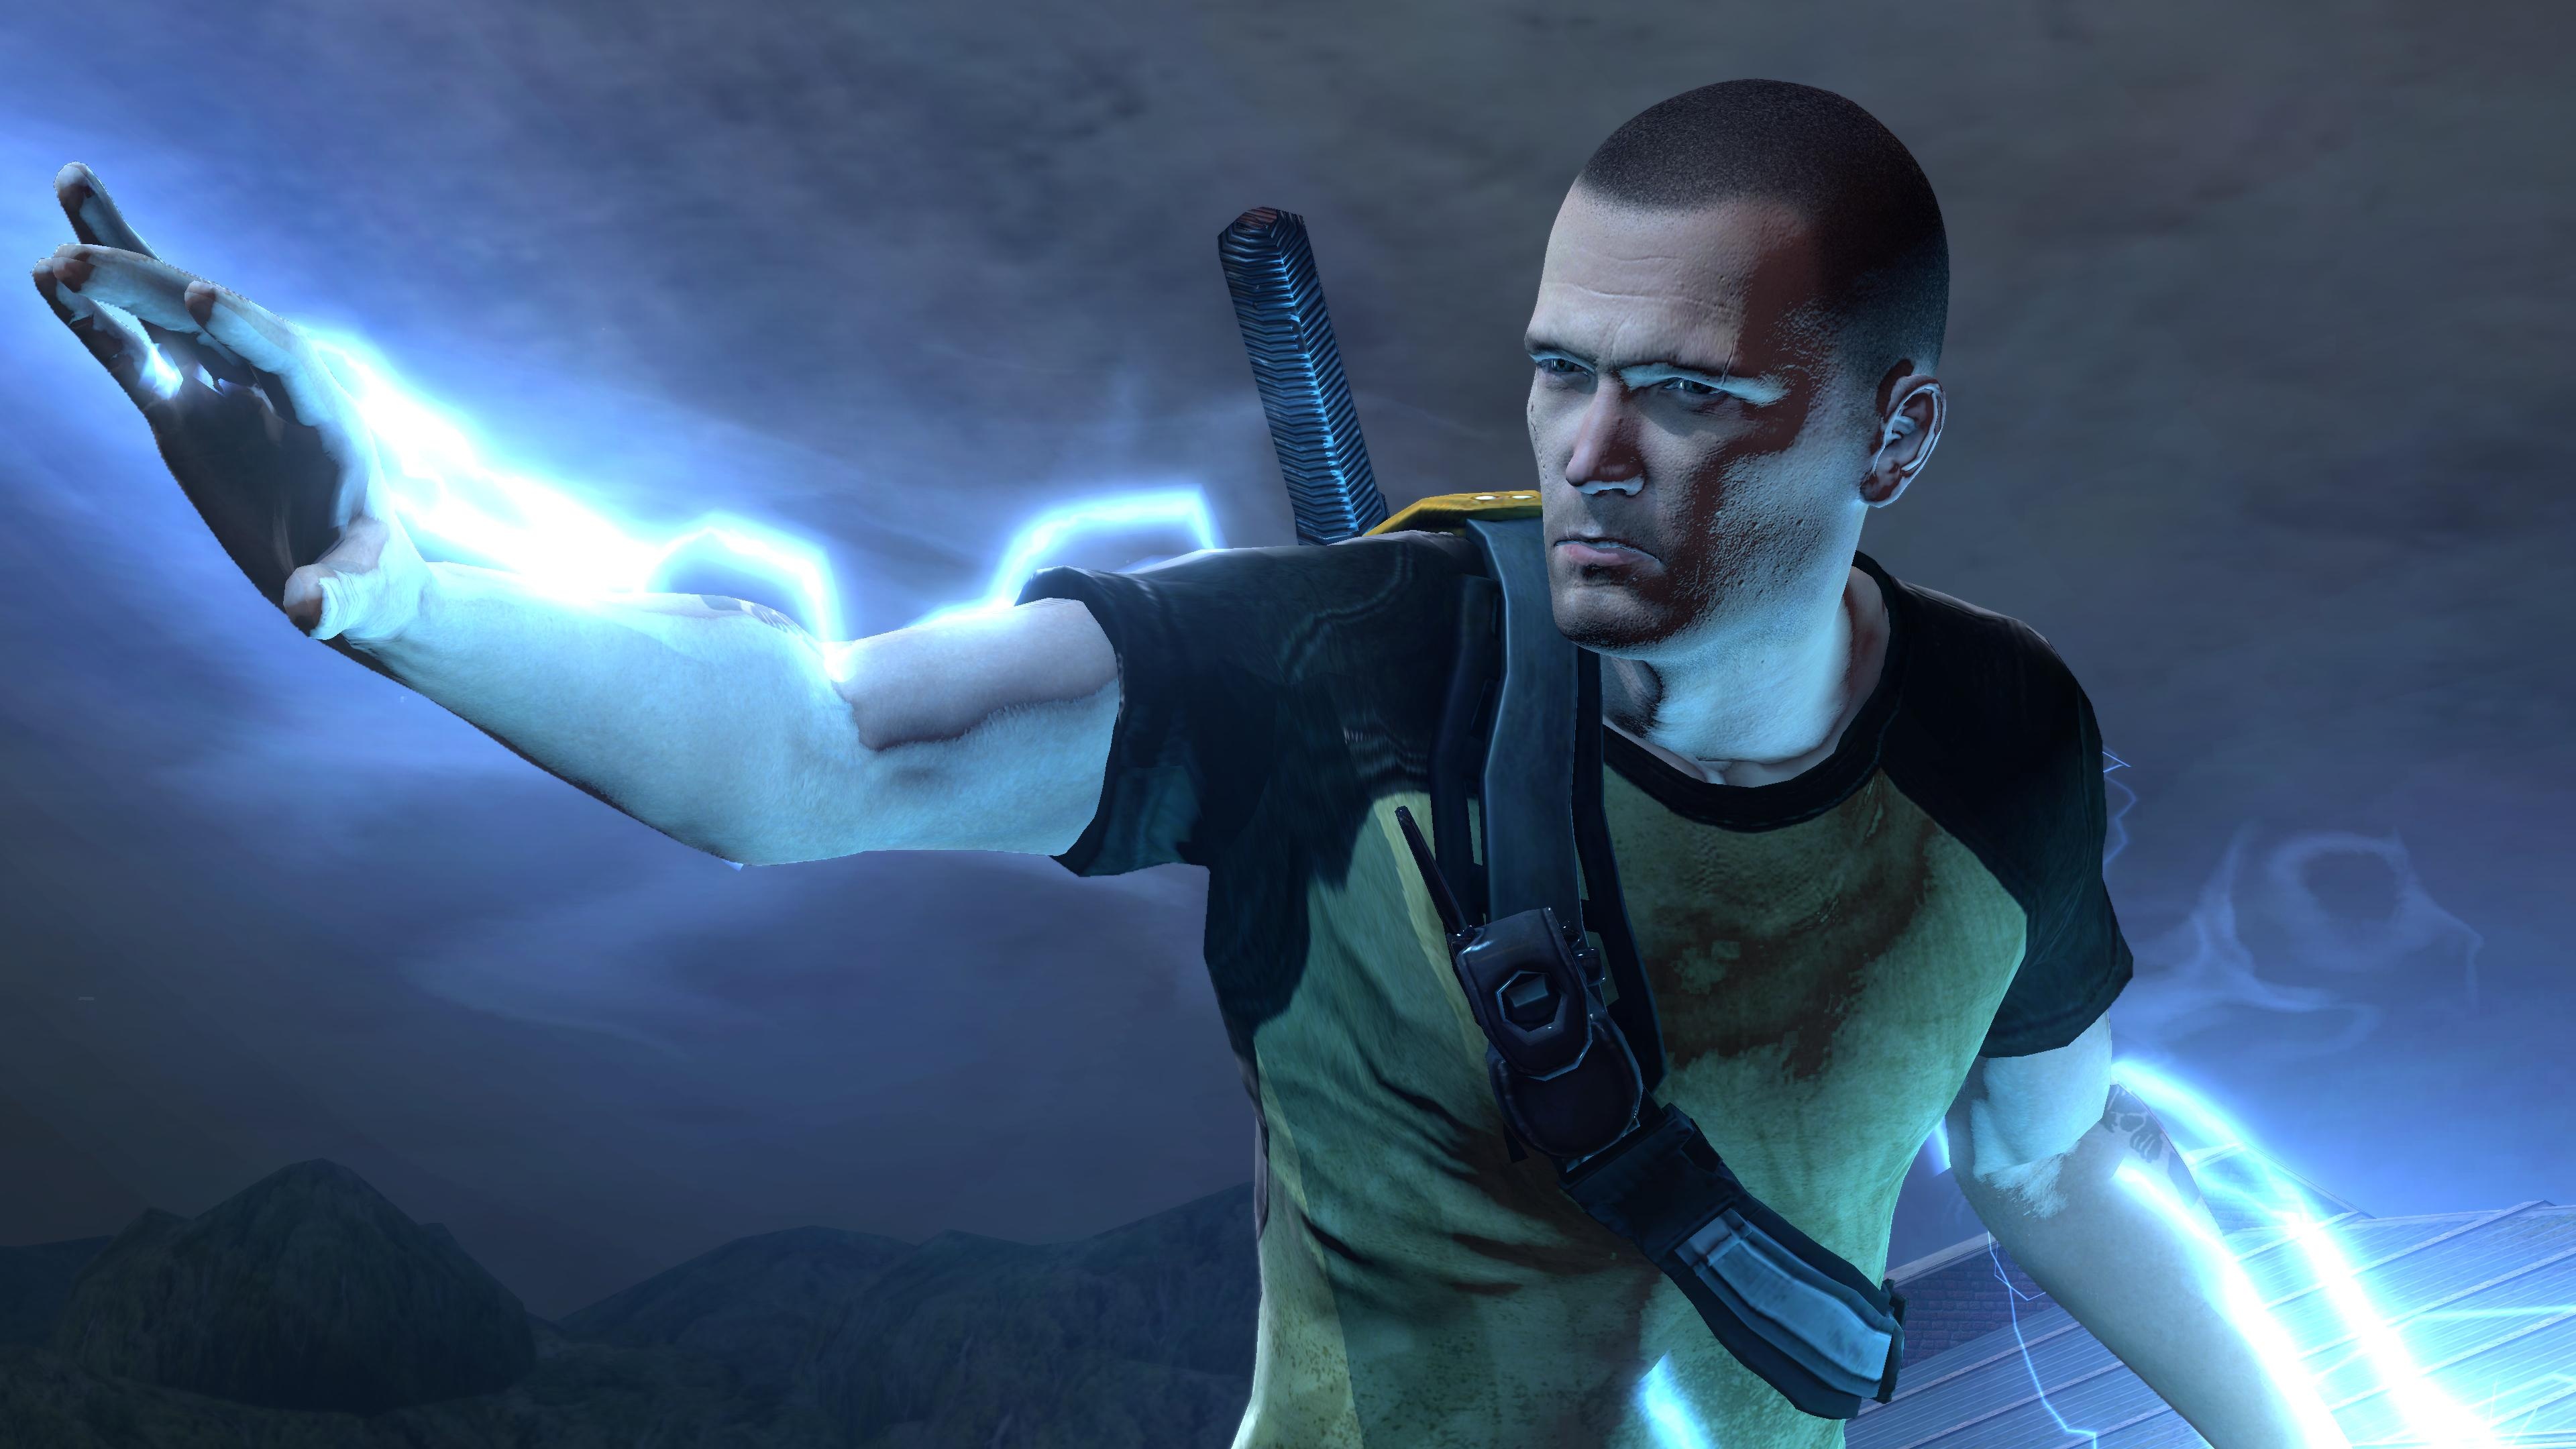 inFAMOUS 2, Promotional images, Exciting superpowers, Action-packed adventure, 3840x2160 4K Desktop